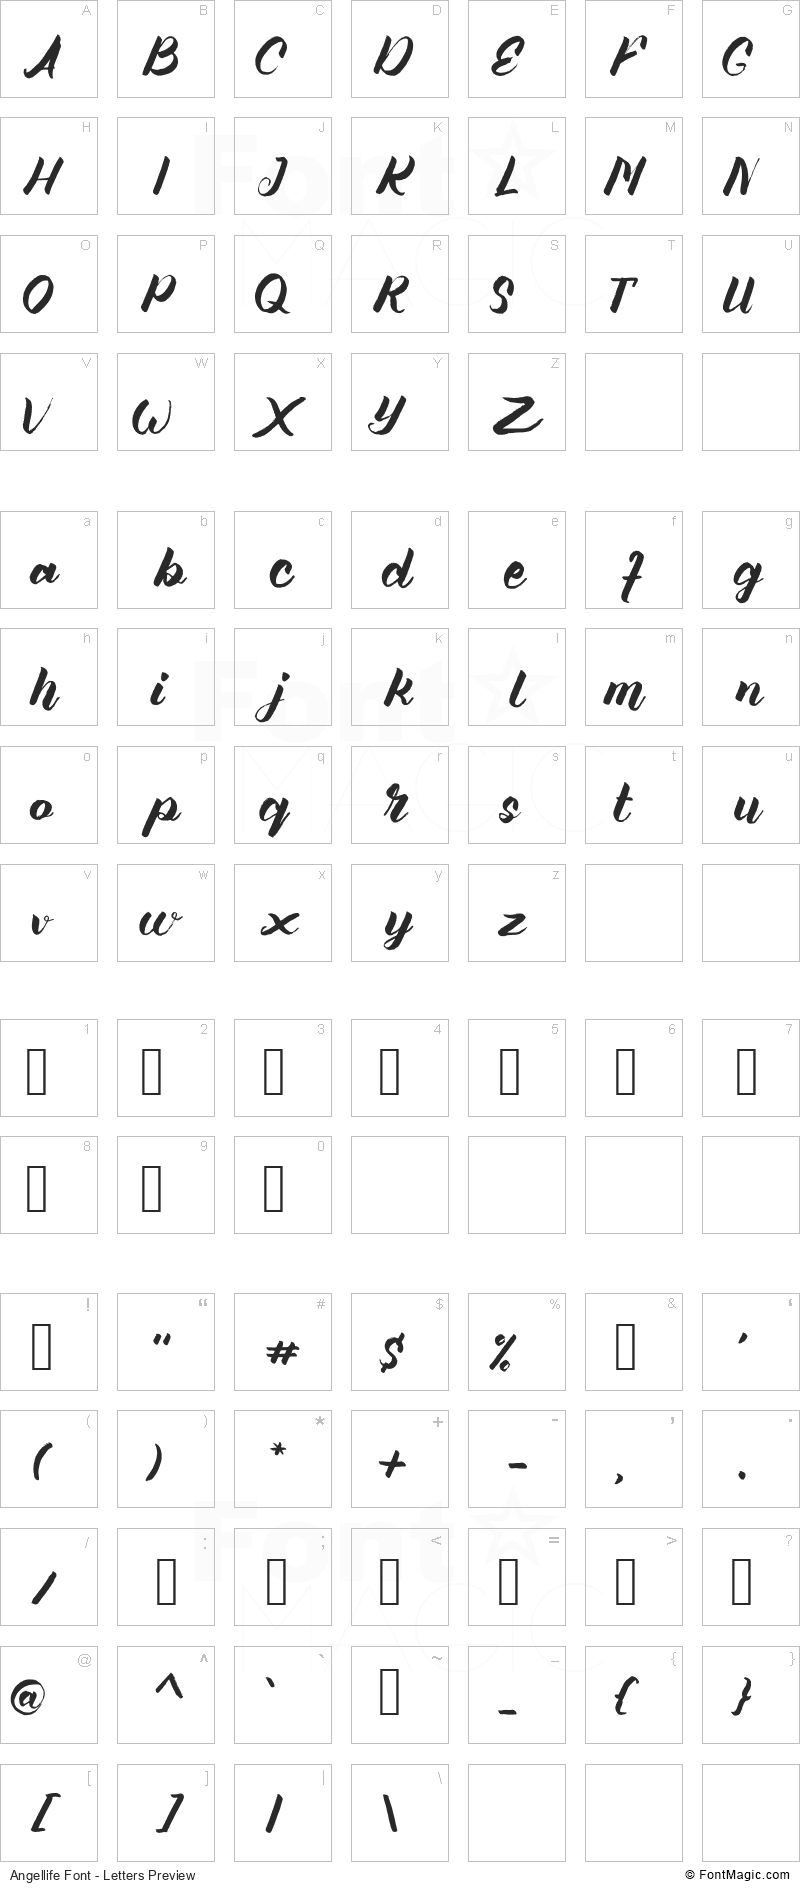 Angellife Font - All Latters Preview Chart